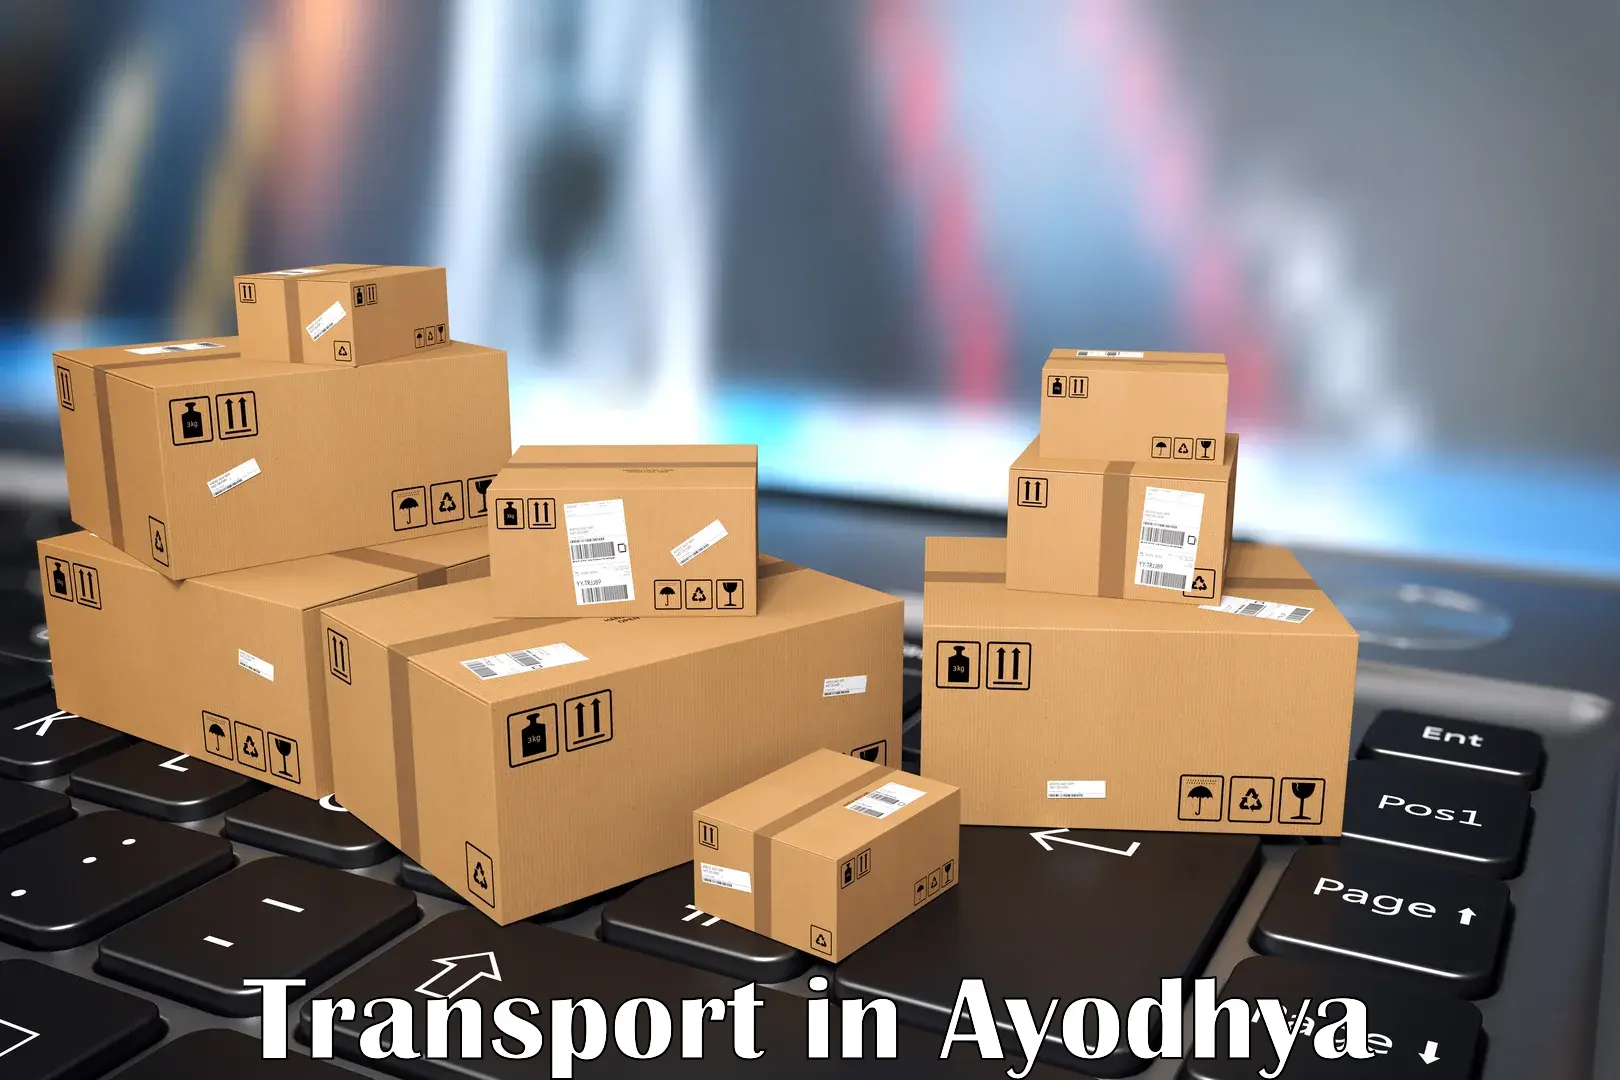 Luggage transport services in Ayodhya